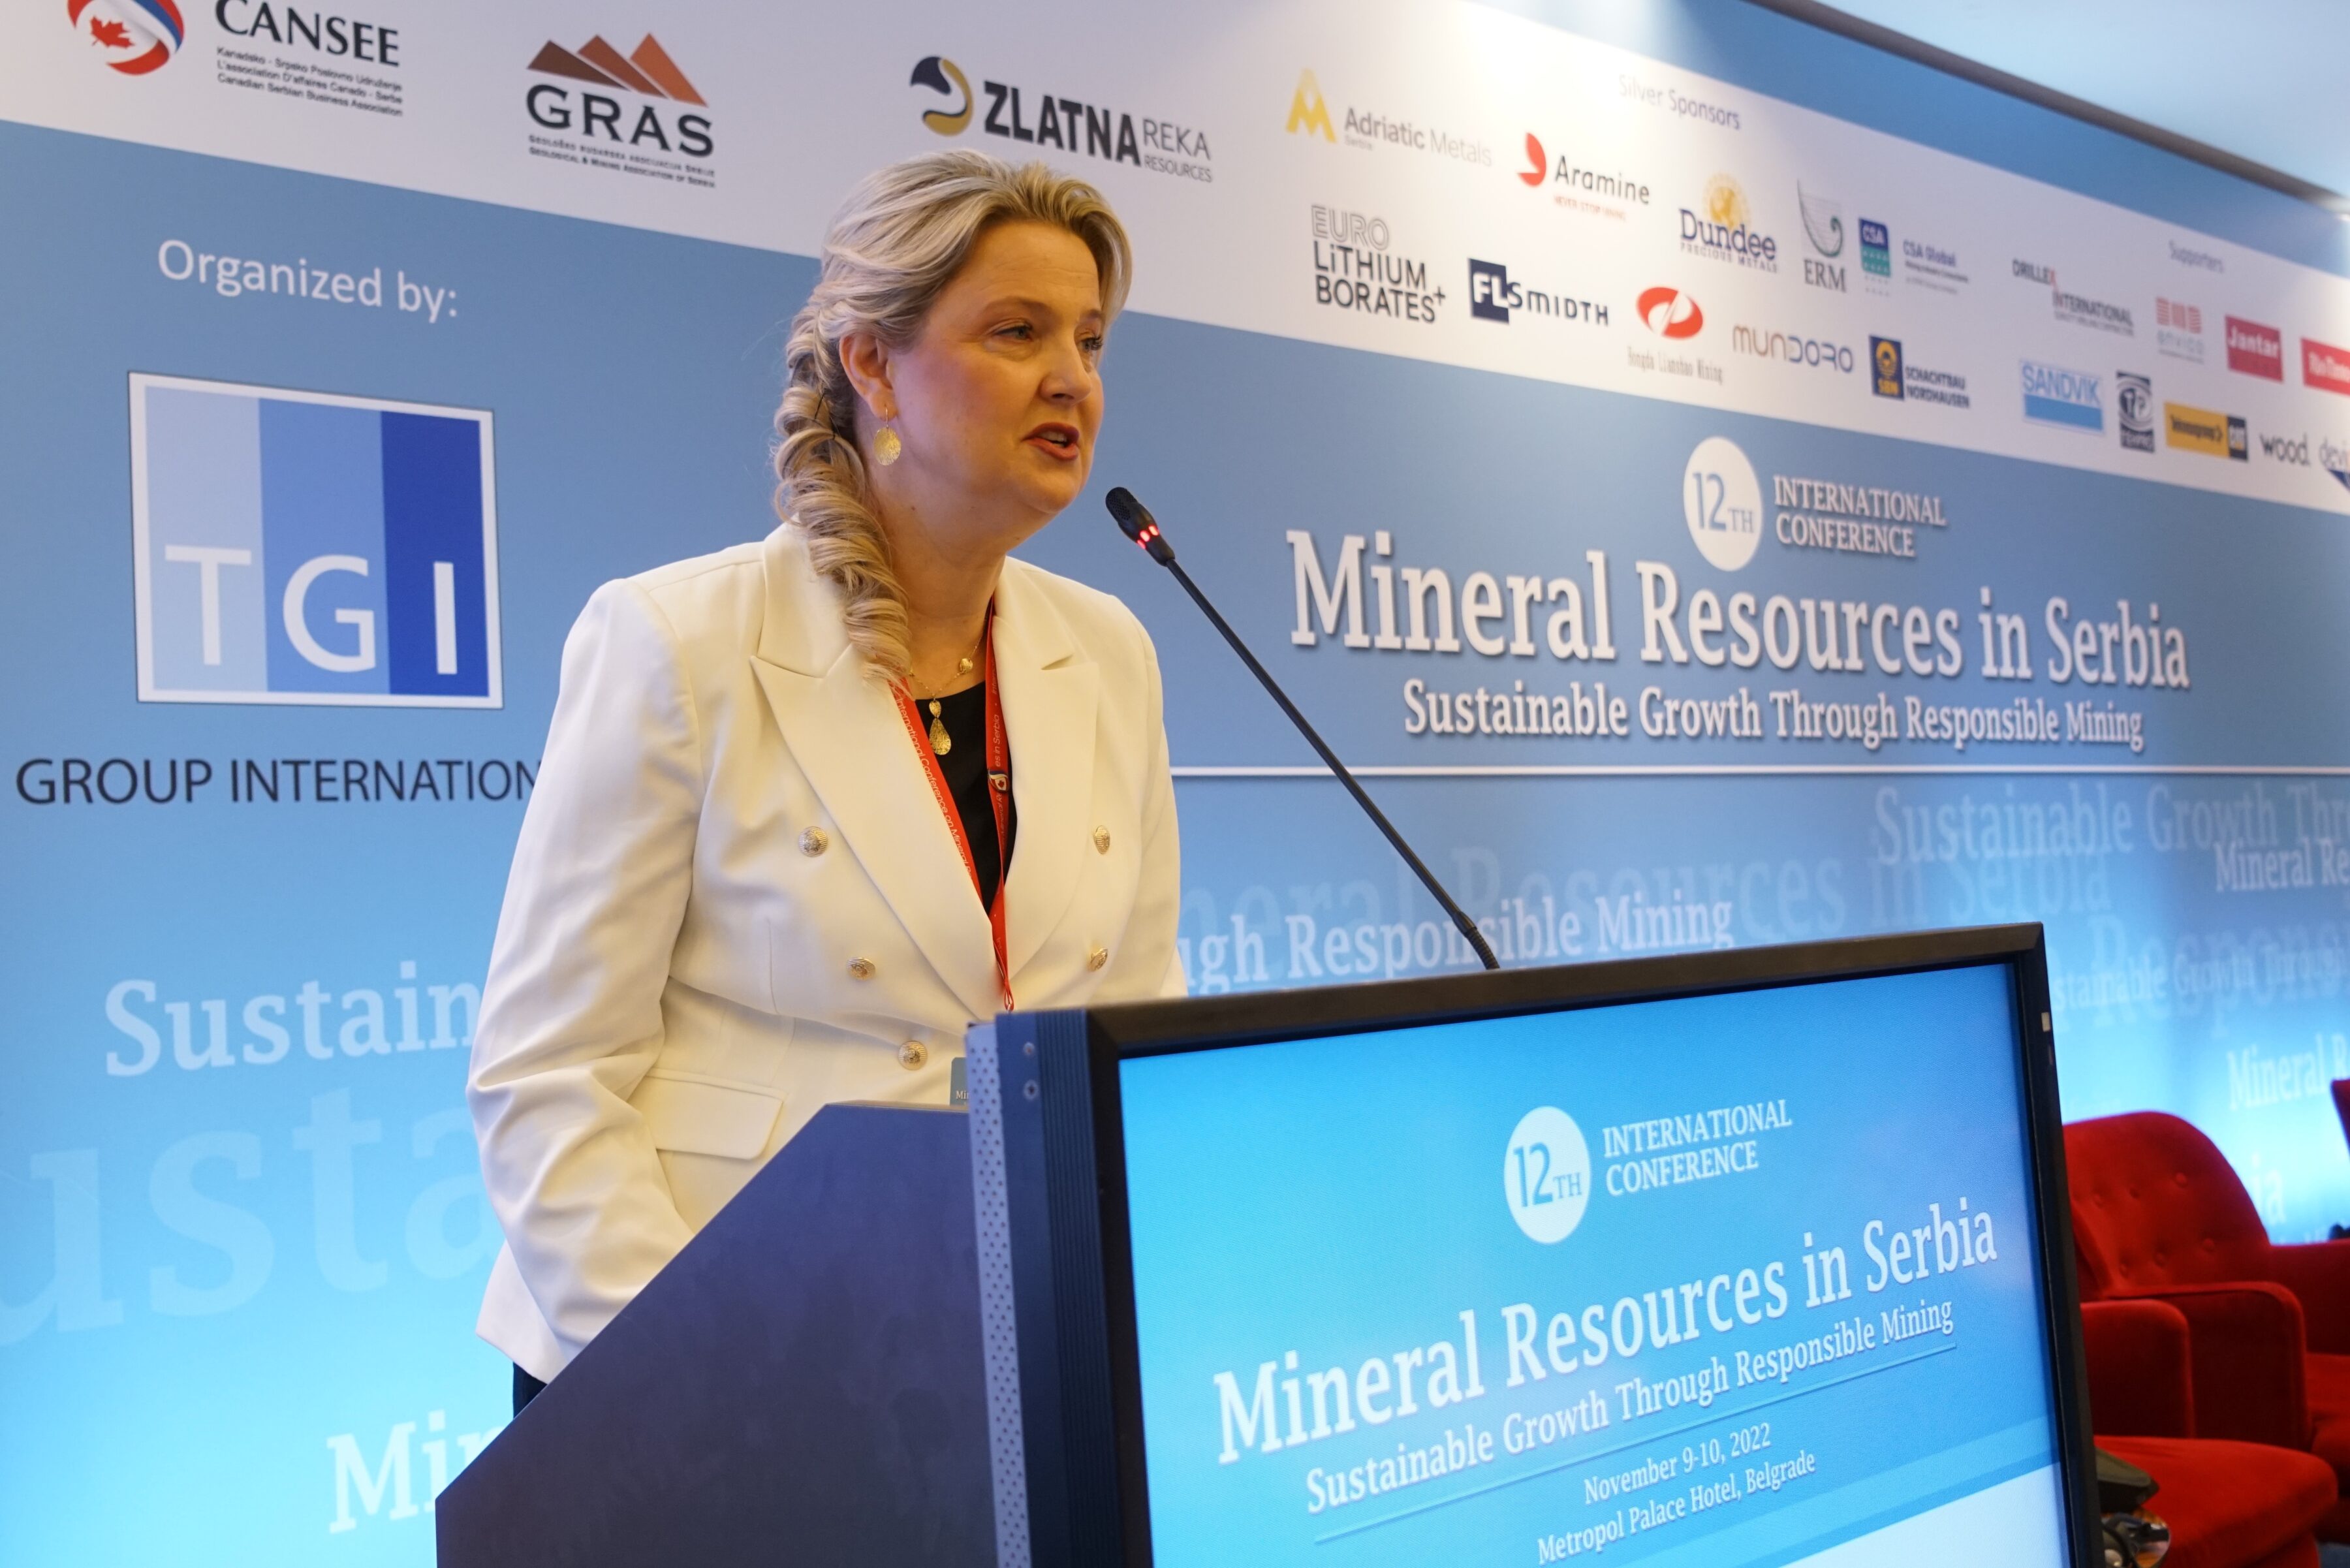 Smart Mining, Sustainable Development, and Risk Assessment Key Topics at 12th International Conference on Mineral Resources